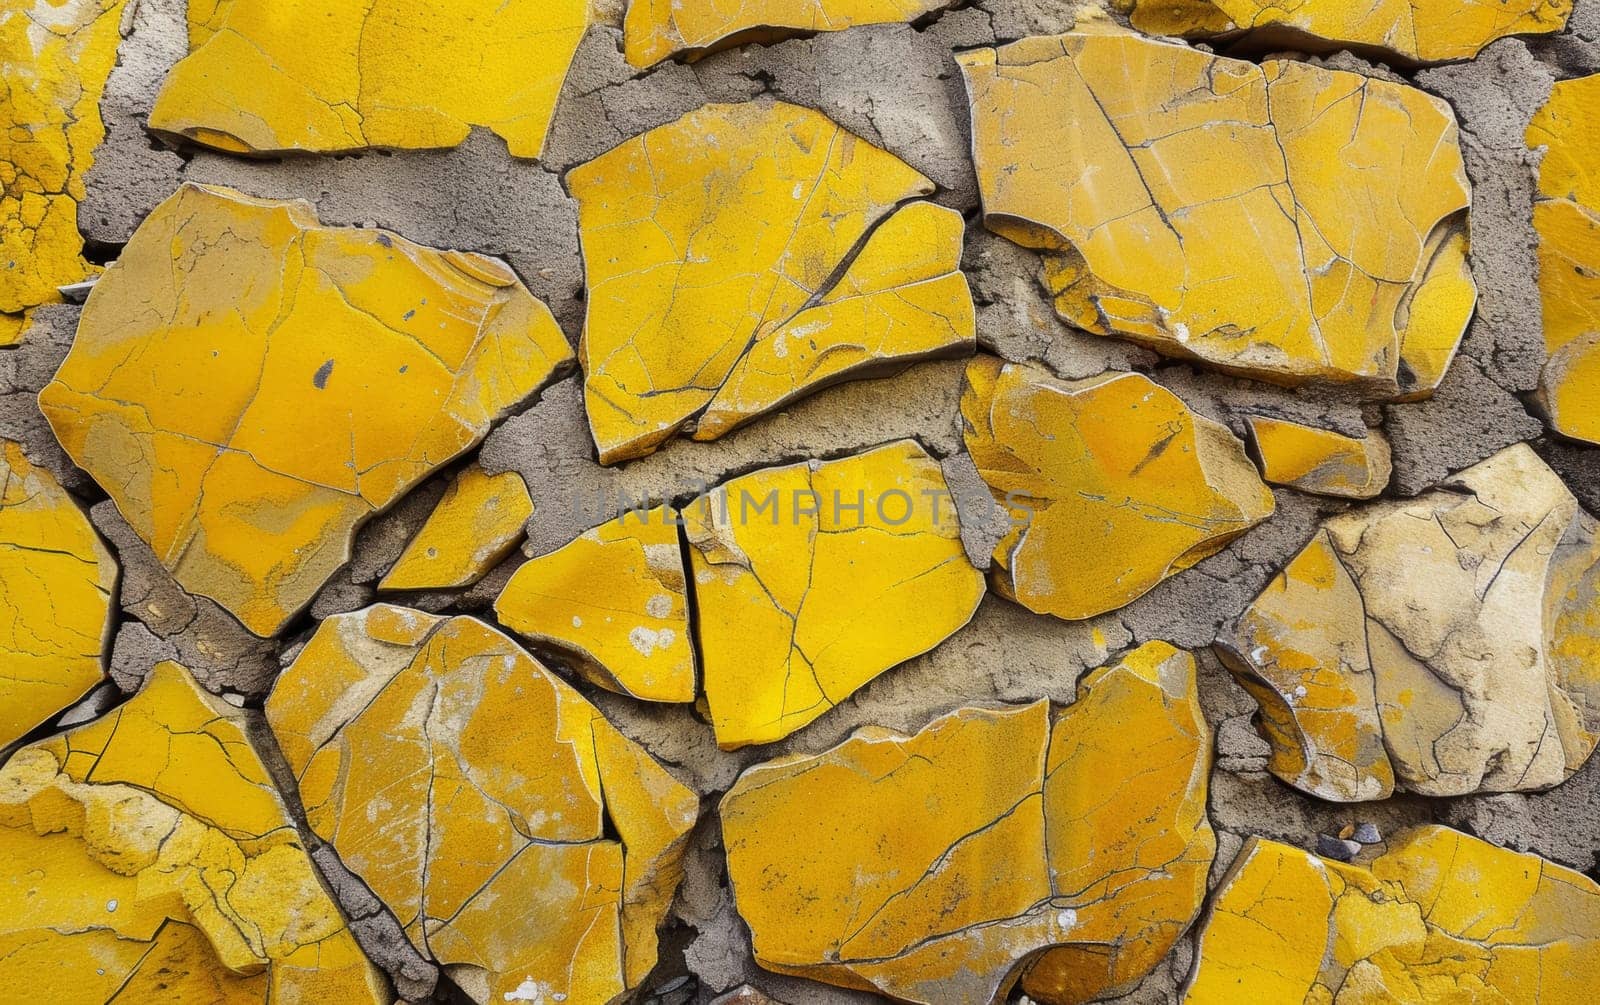 Close-up of a textured wall with interlocked yellow stones, exhibiting natural patterns and a rugged surface